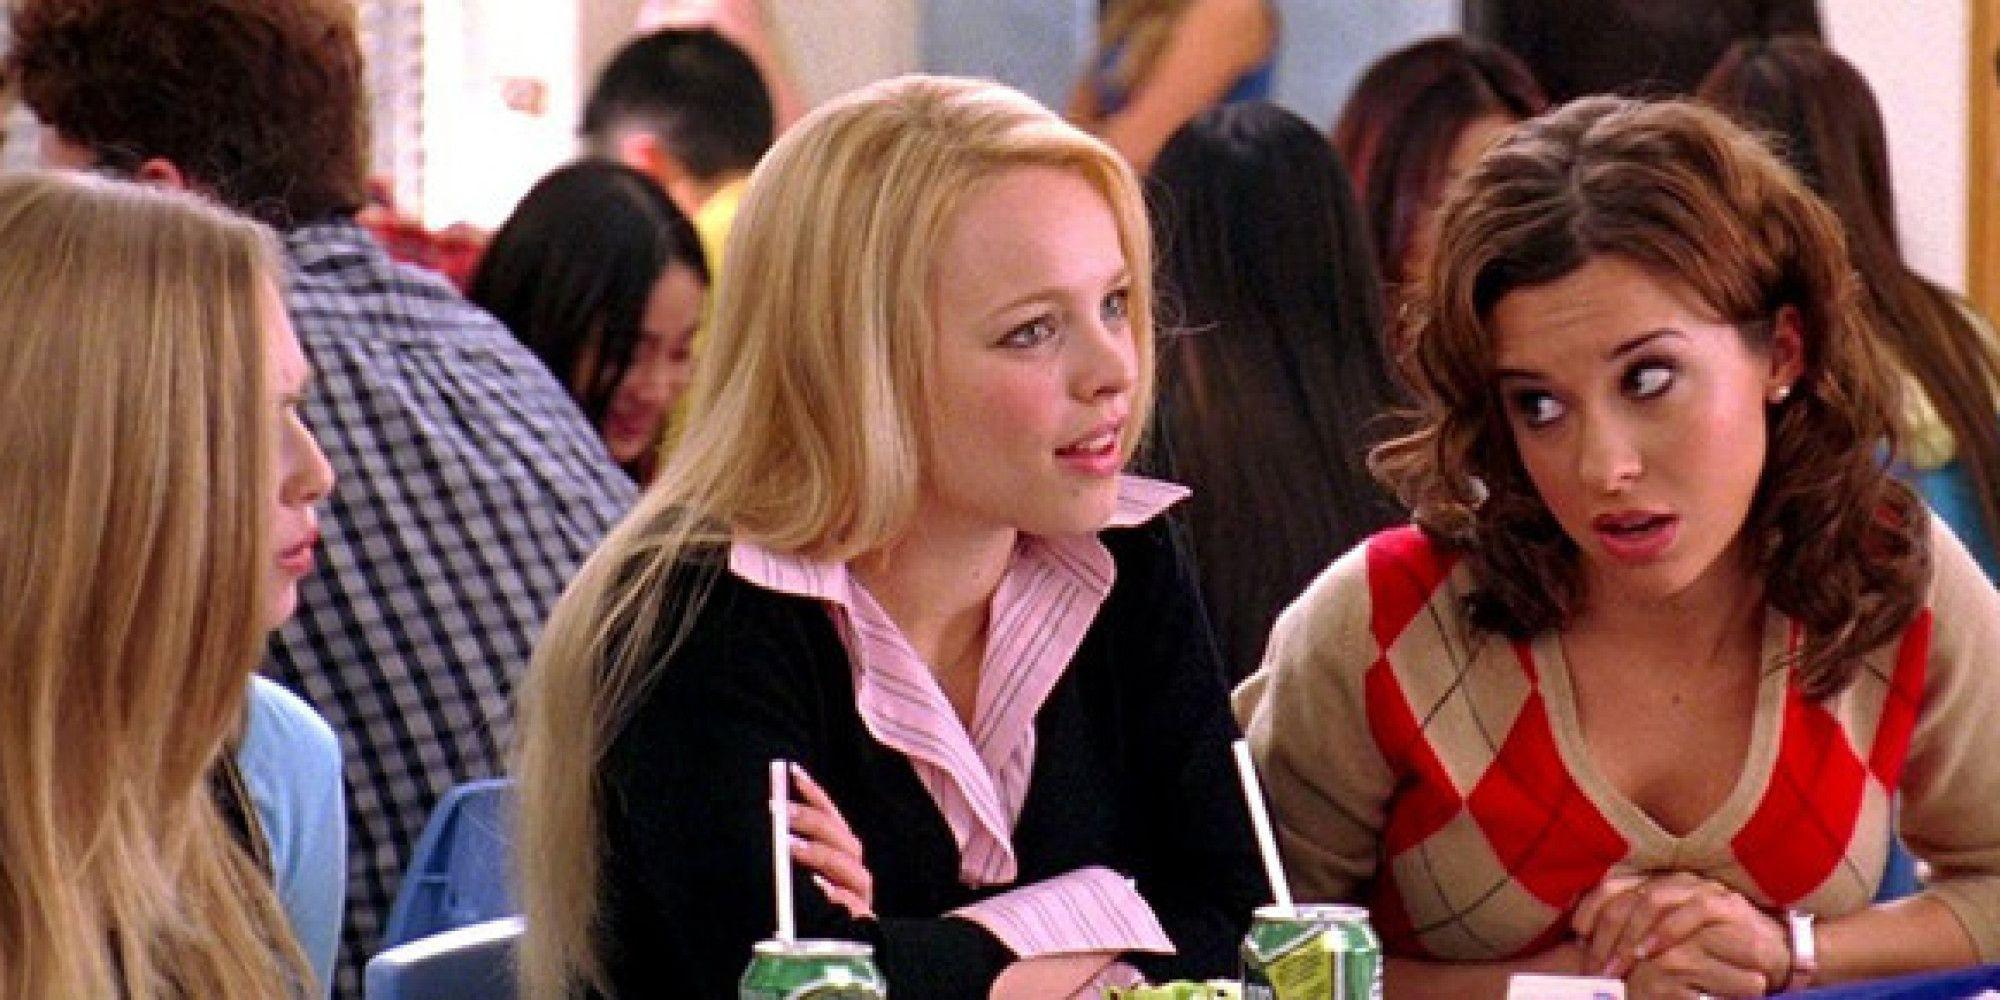 Mean Girls: The Movie for Teens 10 Years Later